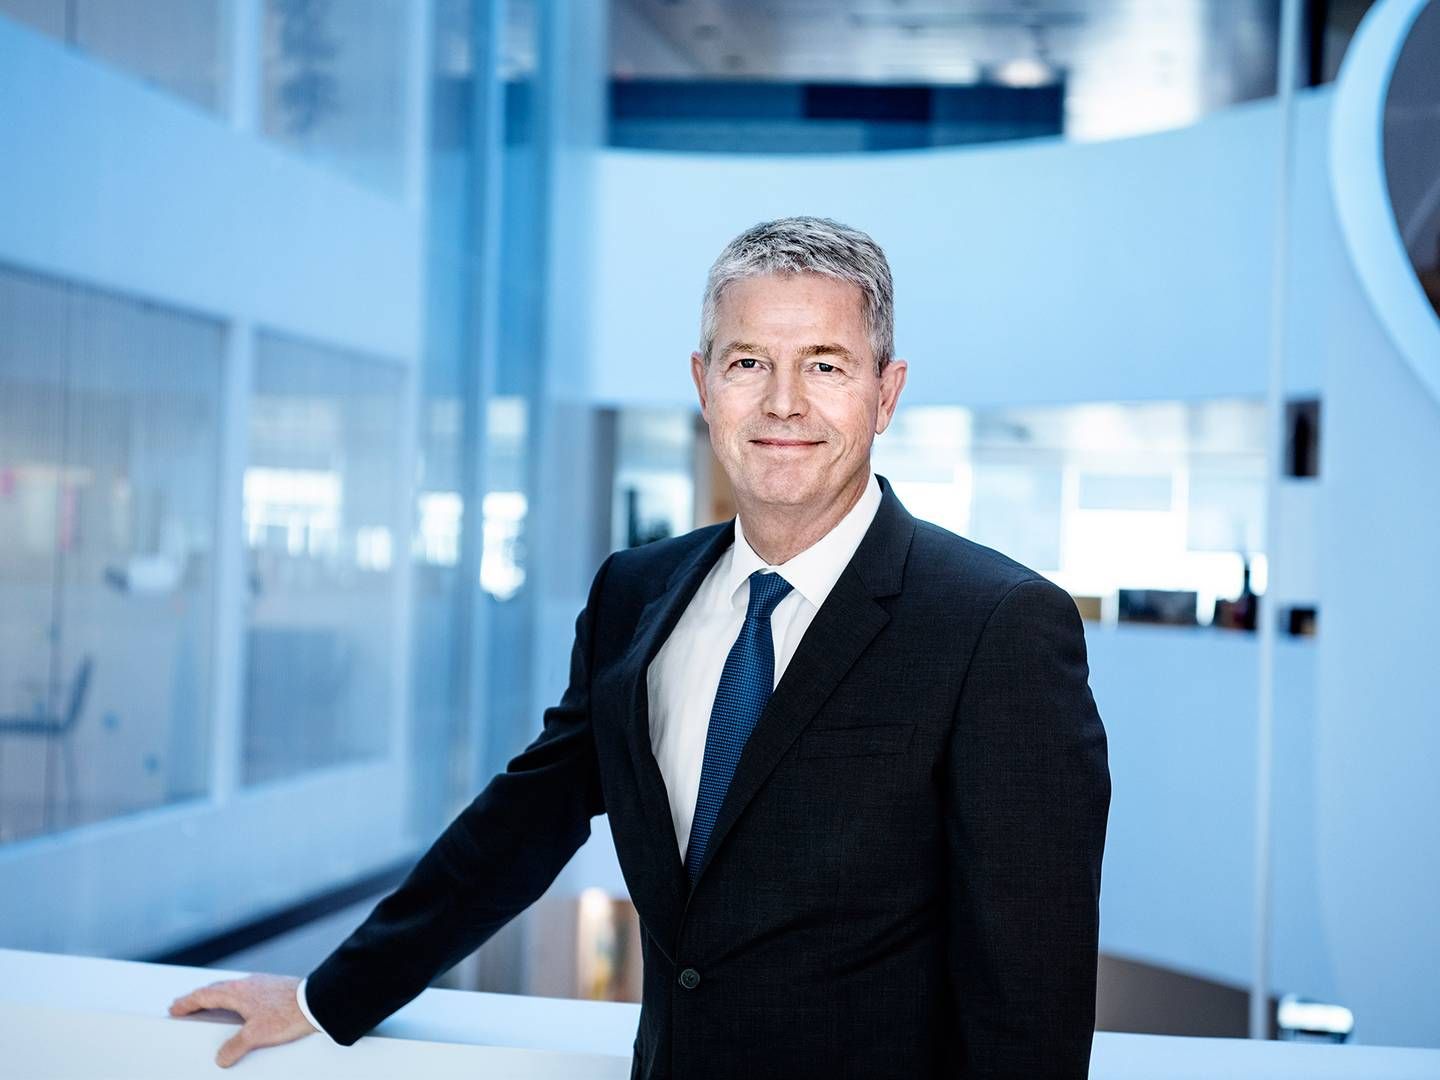 Hasse Jørgensen has been CEO of the pension company Sampension since 2010. | Photo: Pr/sampension